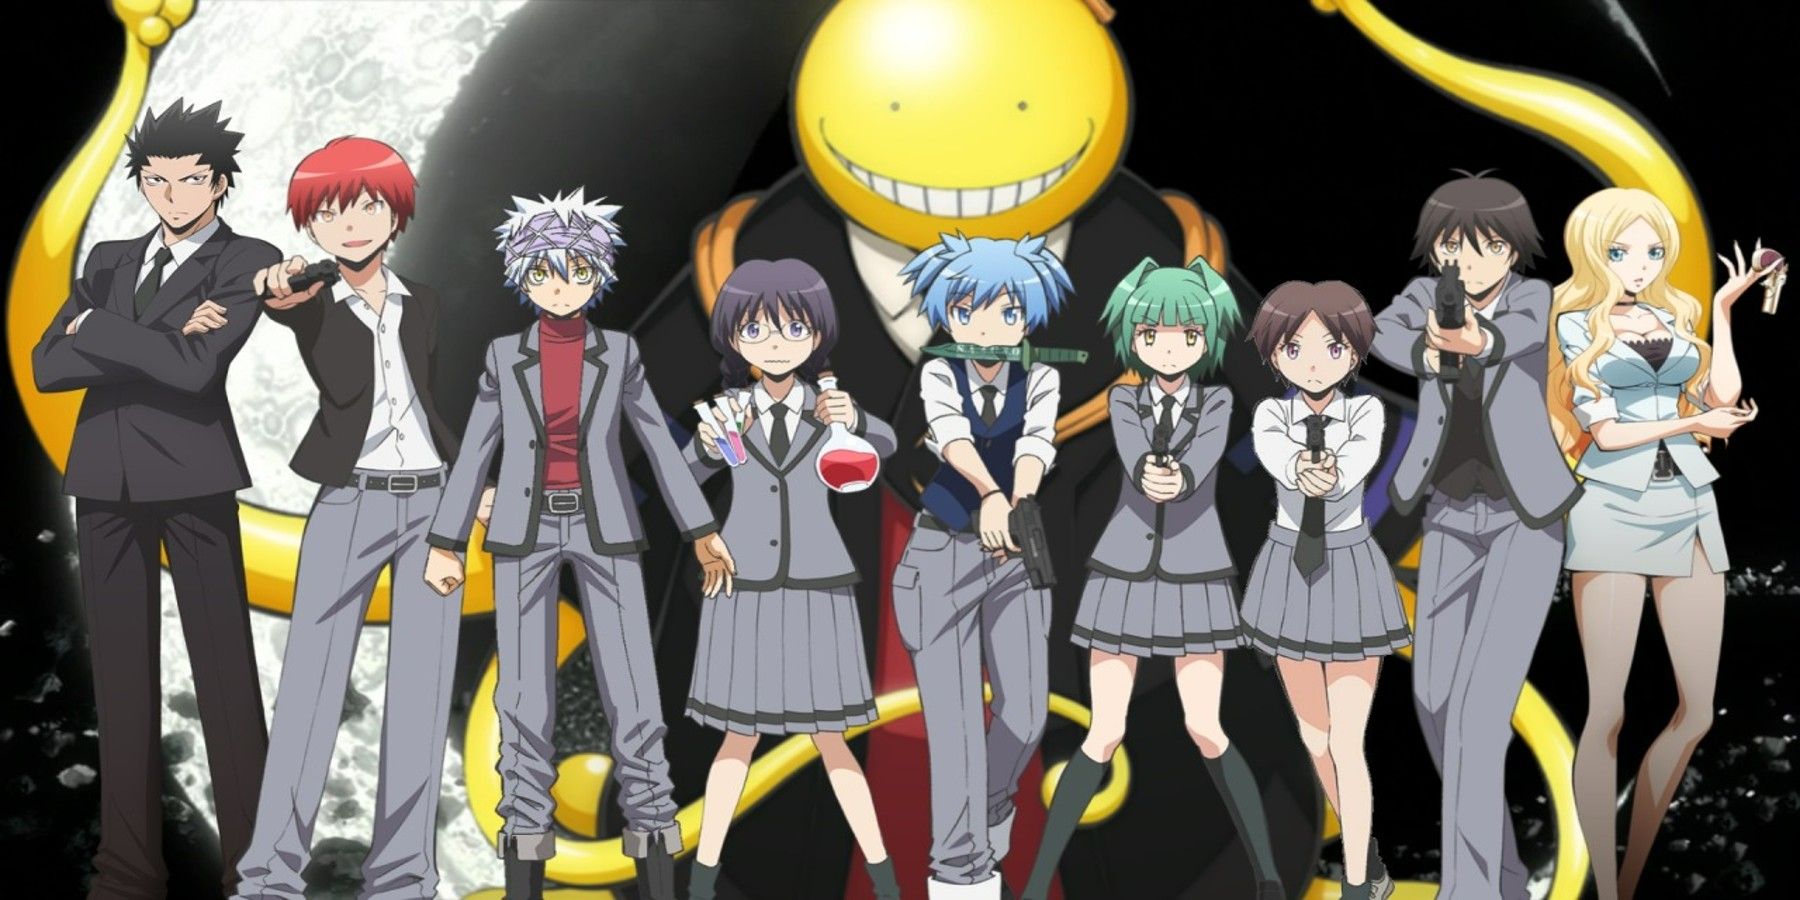 Continue the Binge with 'Assassination Classroom' on Crunchyroll